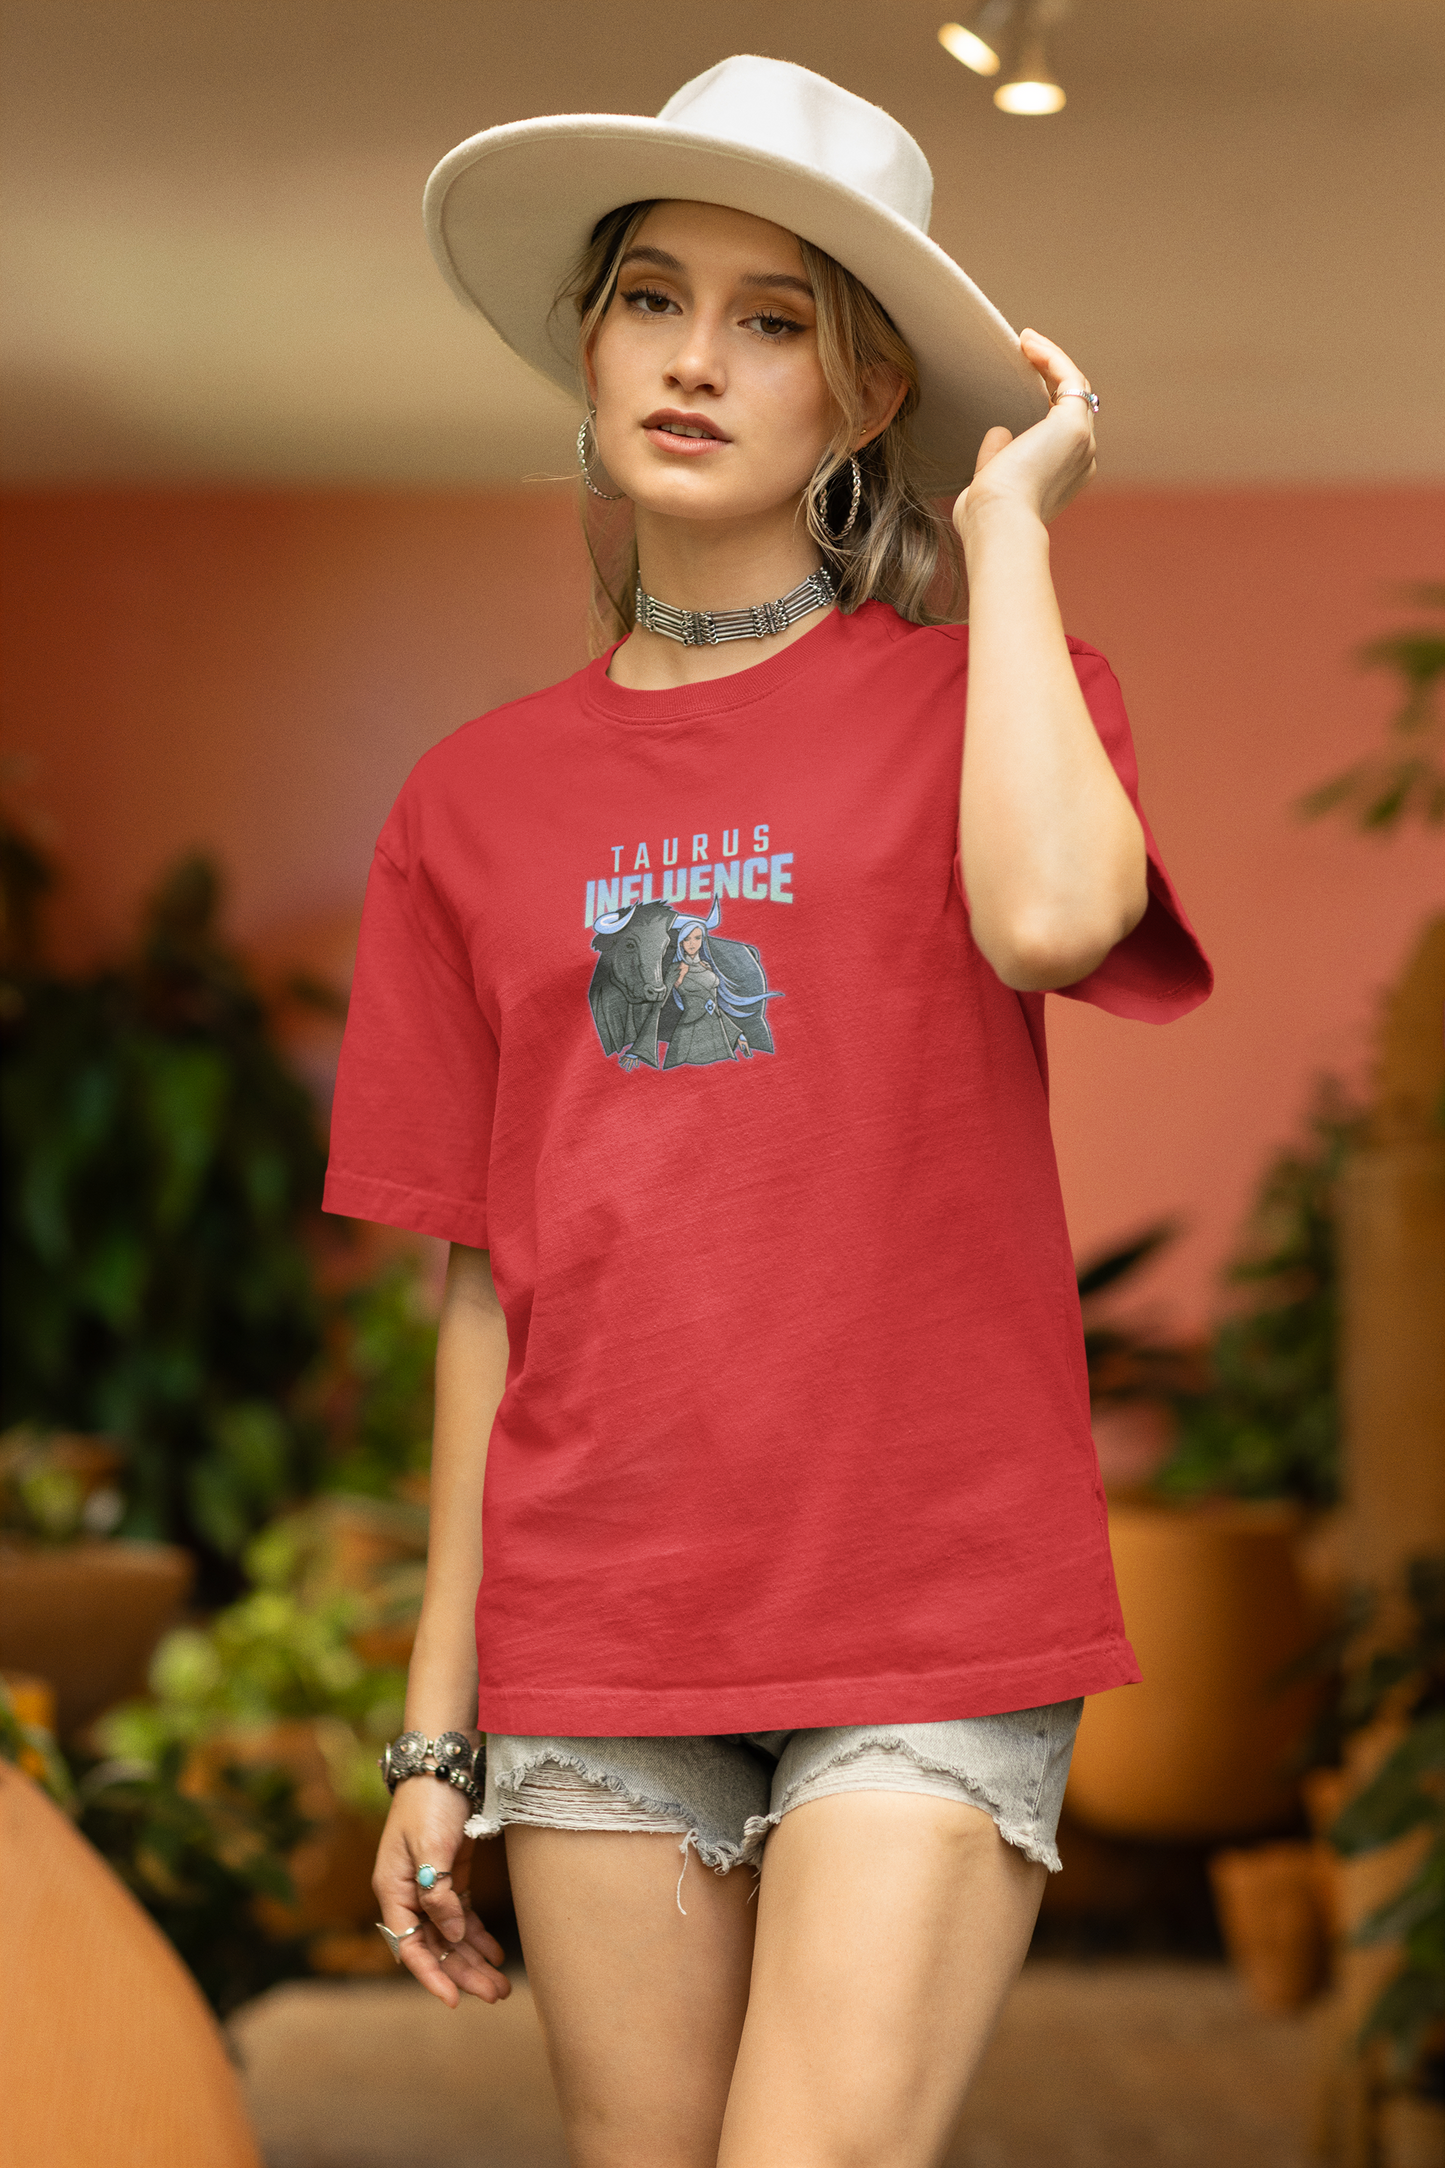 Taurus Oversized Red Front and Back Printed T-shirt Unisex